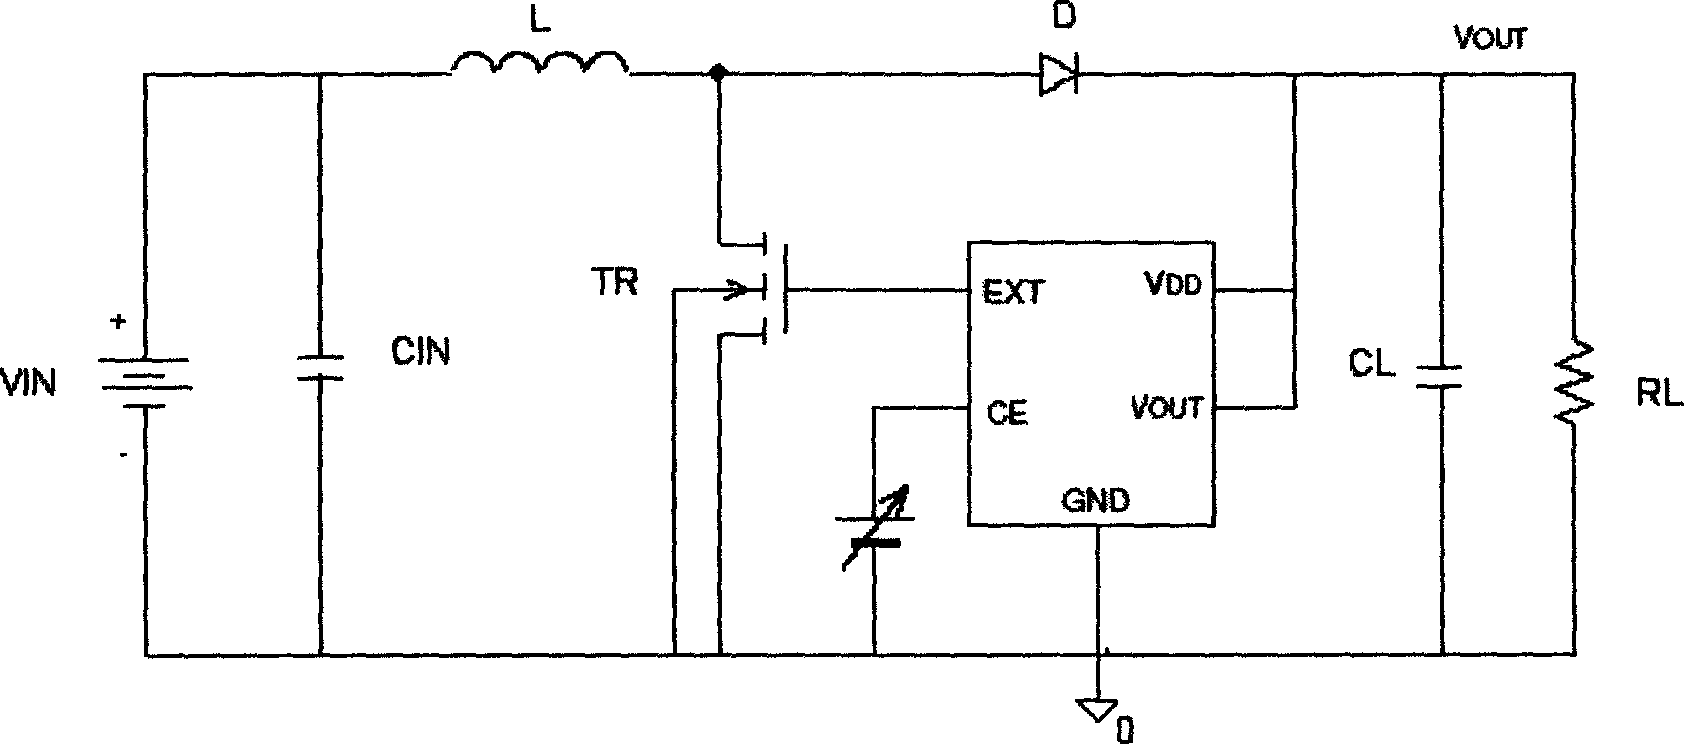 Voltage reference circuit of pulse width modulation